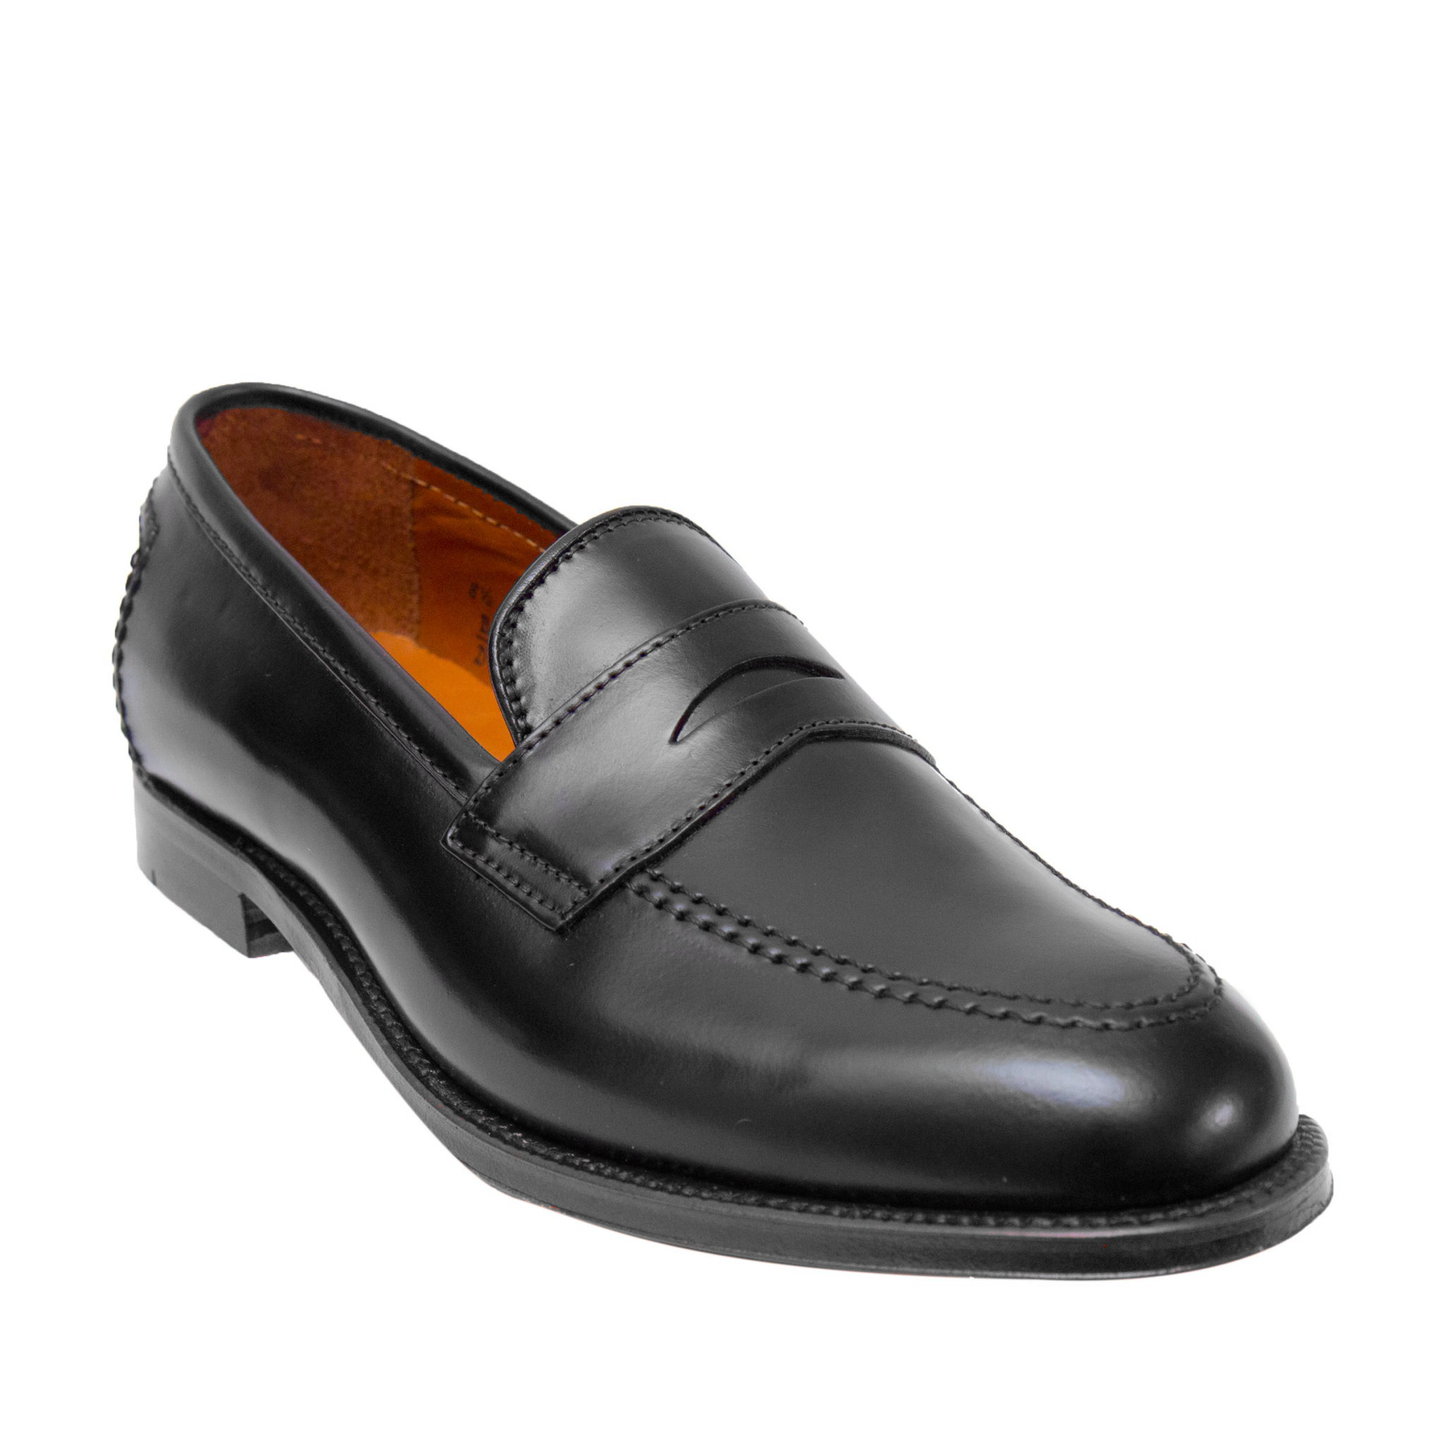 D2221 - Madison Penny in Black Shell Cordovan